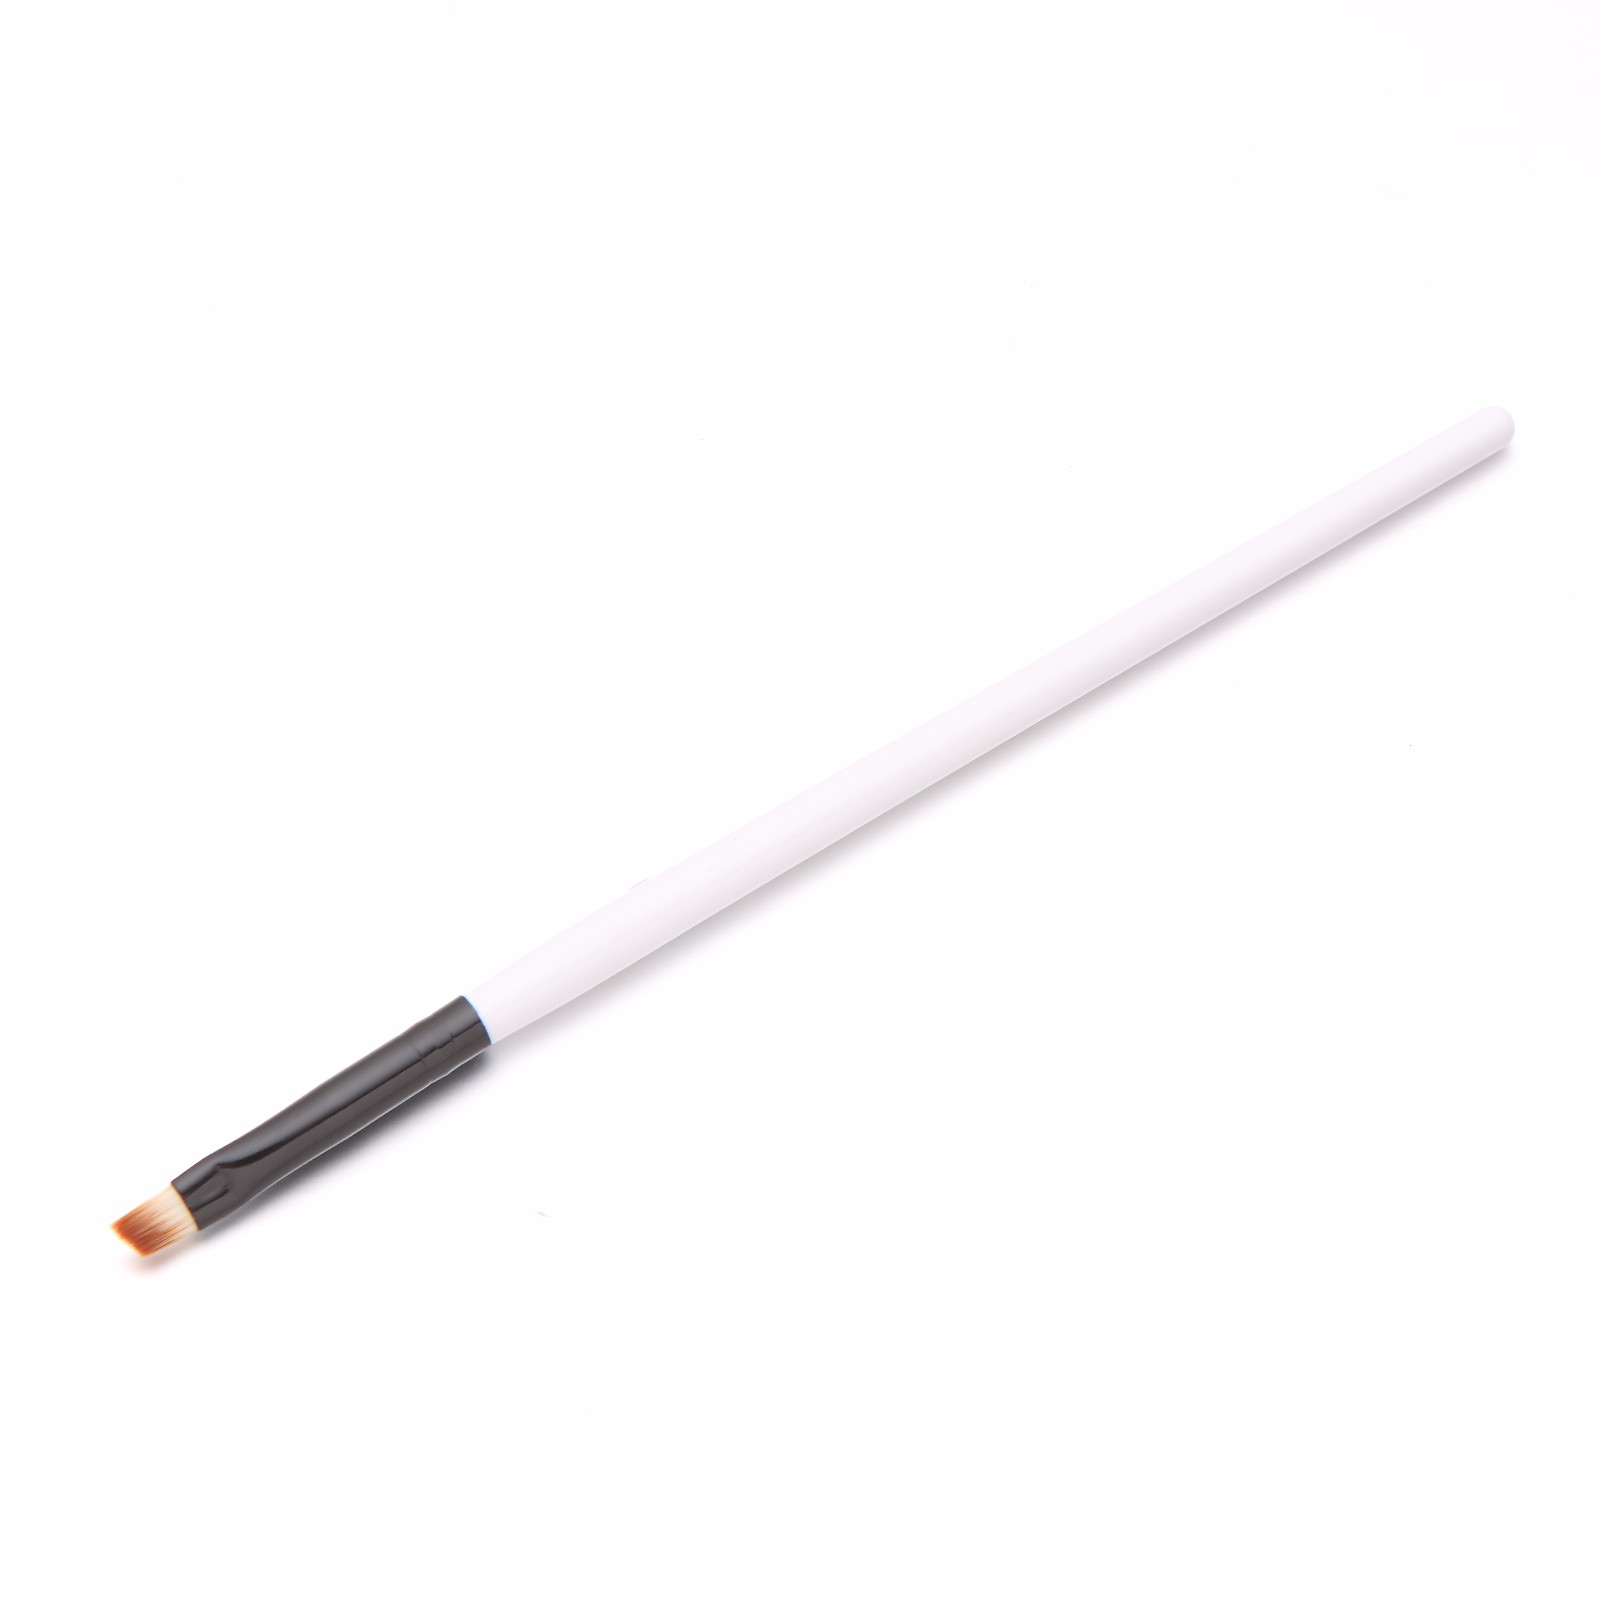 1pc Eye Oblique Angled Eyebrow Eyeliner Brow Lip Contour Brush Makeup Brushes Cosmetic Tool